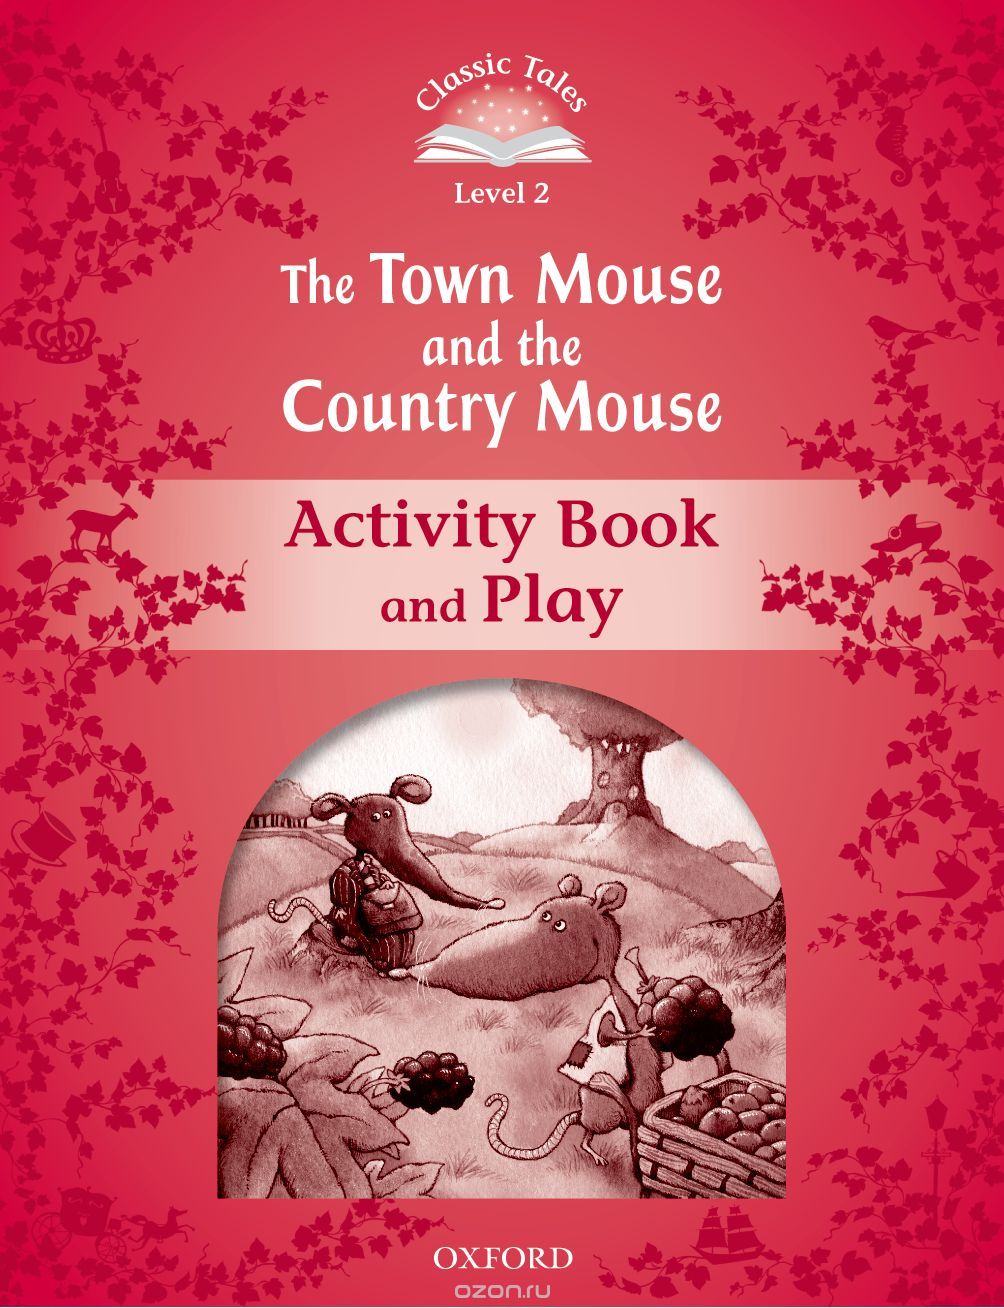 Скачать книгу "Classic tales LEVEL 2 TOWN MOUSE & COUNTRY MOUSE AB 2Ed"